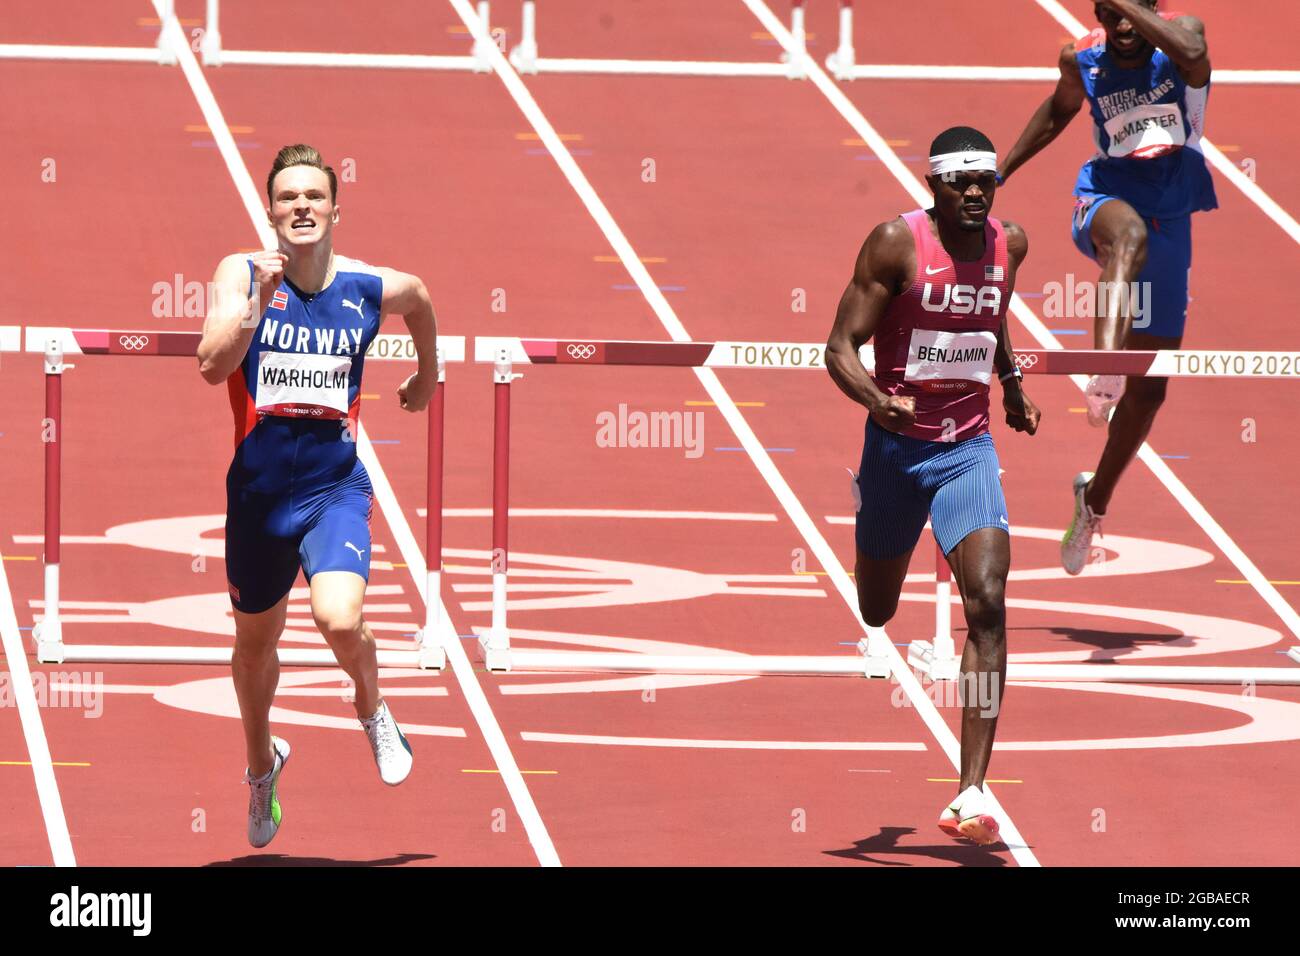 Karsten Warholm (NOR) becomes Olympic champion and breaks the world record  on 400m hurdles during the Olympic Games Tokyo 2020, Athletics on August 3,  2021 at Tokyo stadium in Tokyo, Japan -